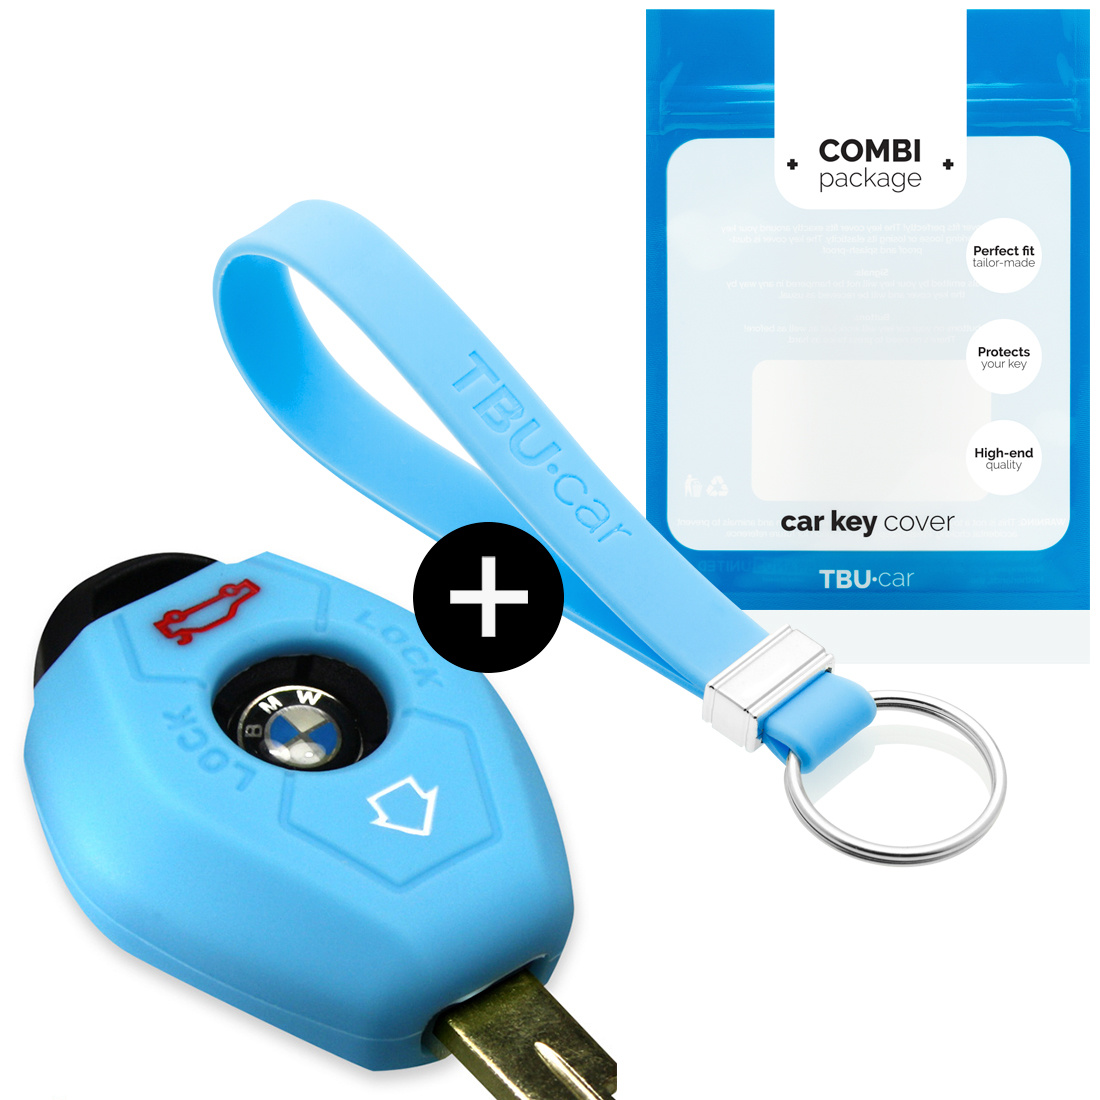 TBU car TBU car Car key cover compatible with BMW - Silicone Protective Remote Key Shell - FOB Case Cover - Light Blue